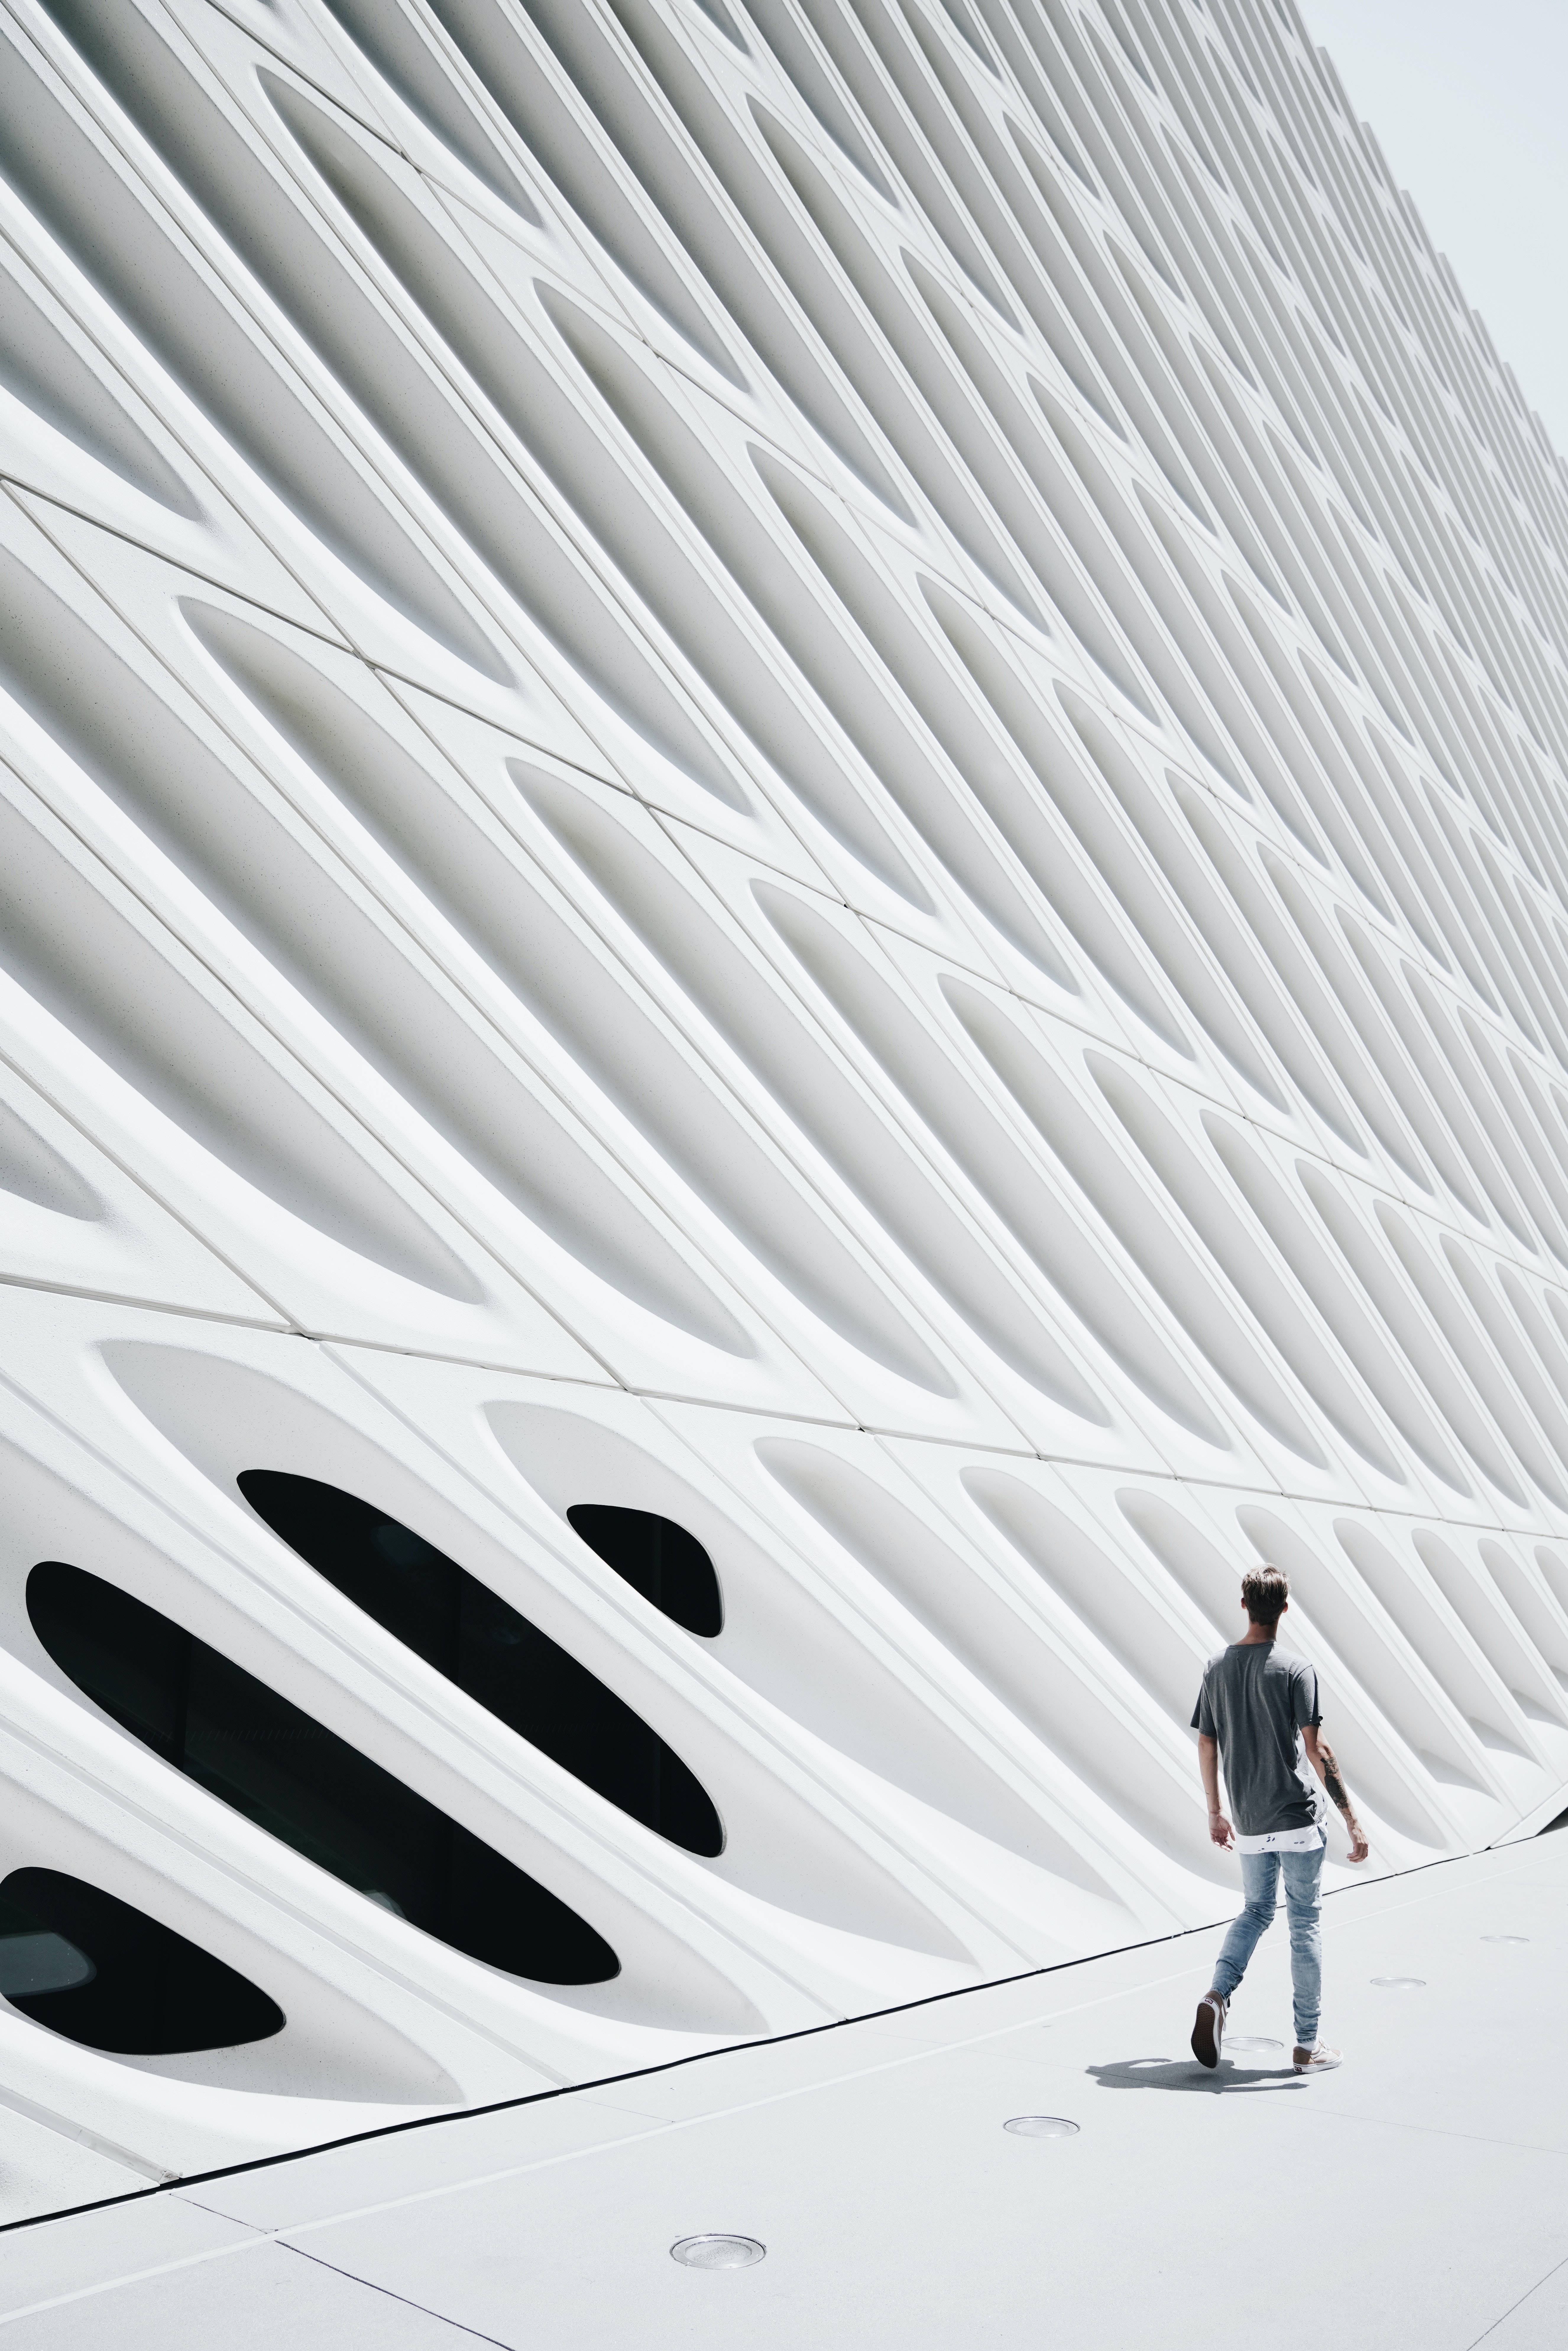 The Broad Museum All White Walls Wallpaper